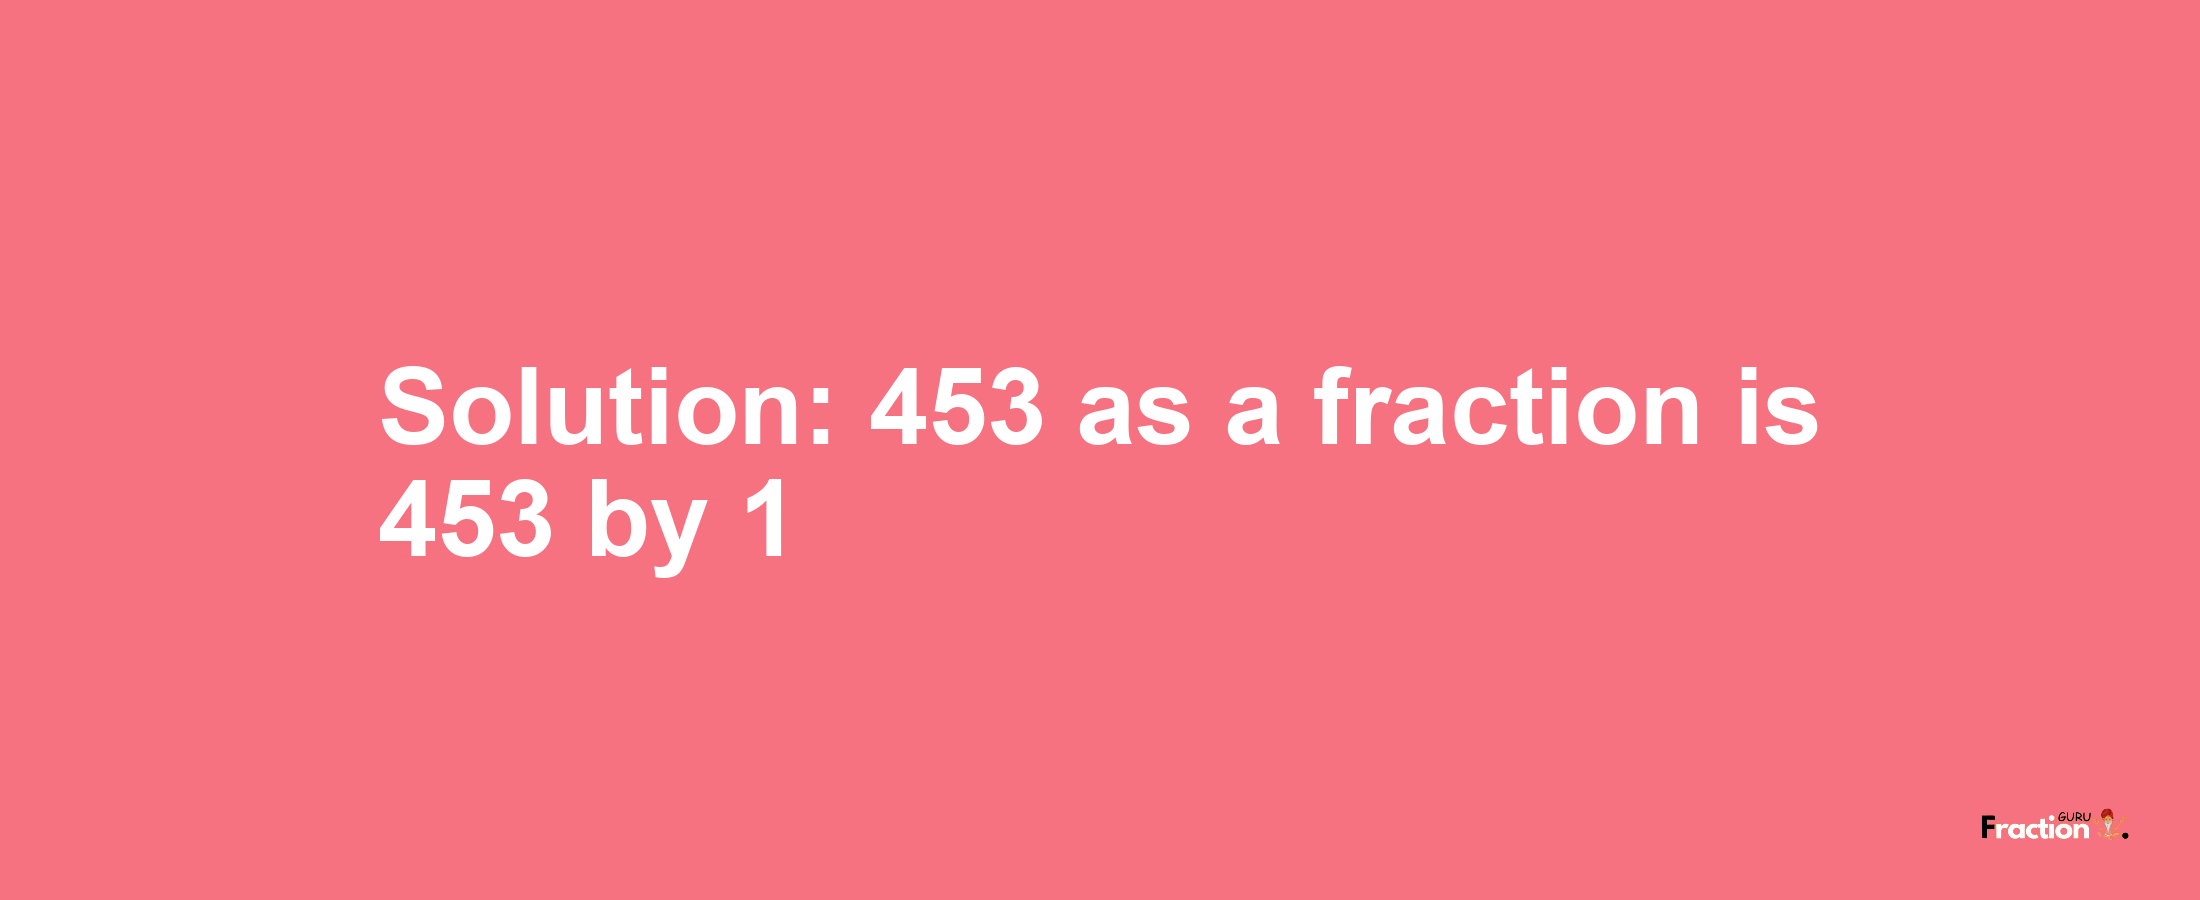 Solution:453 as a fraction is 453/1